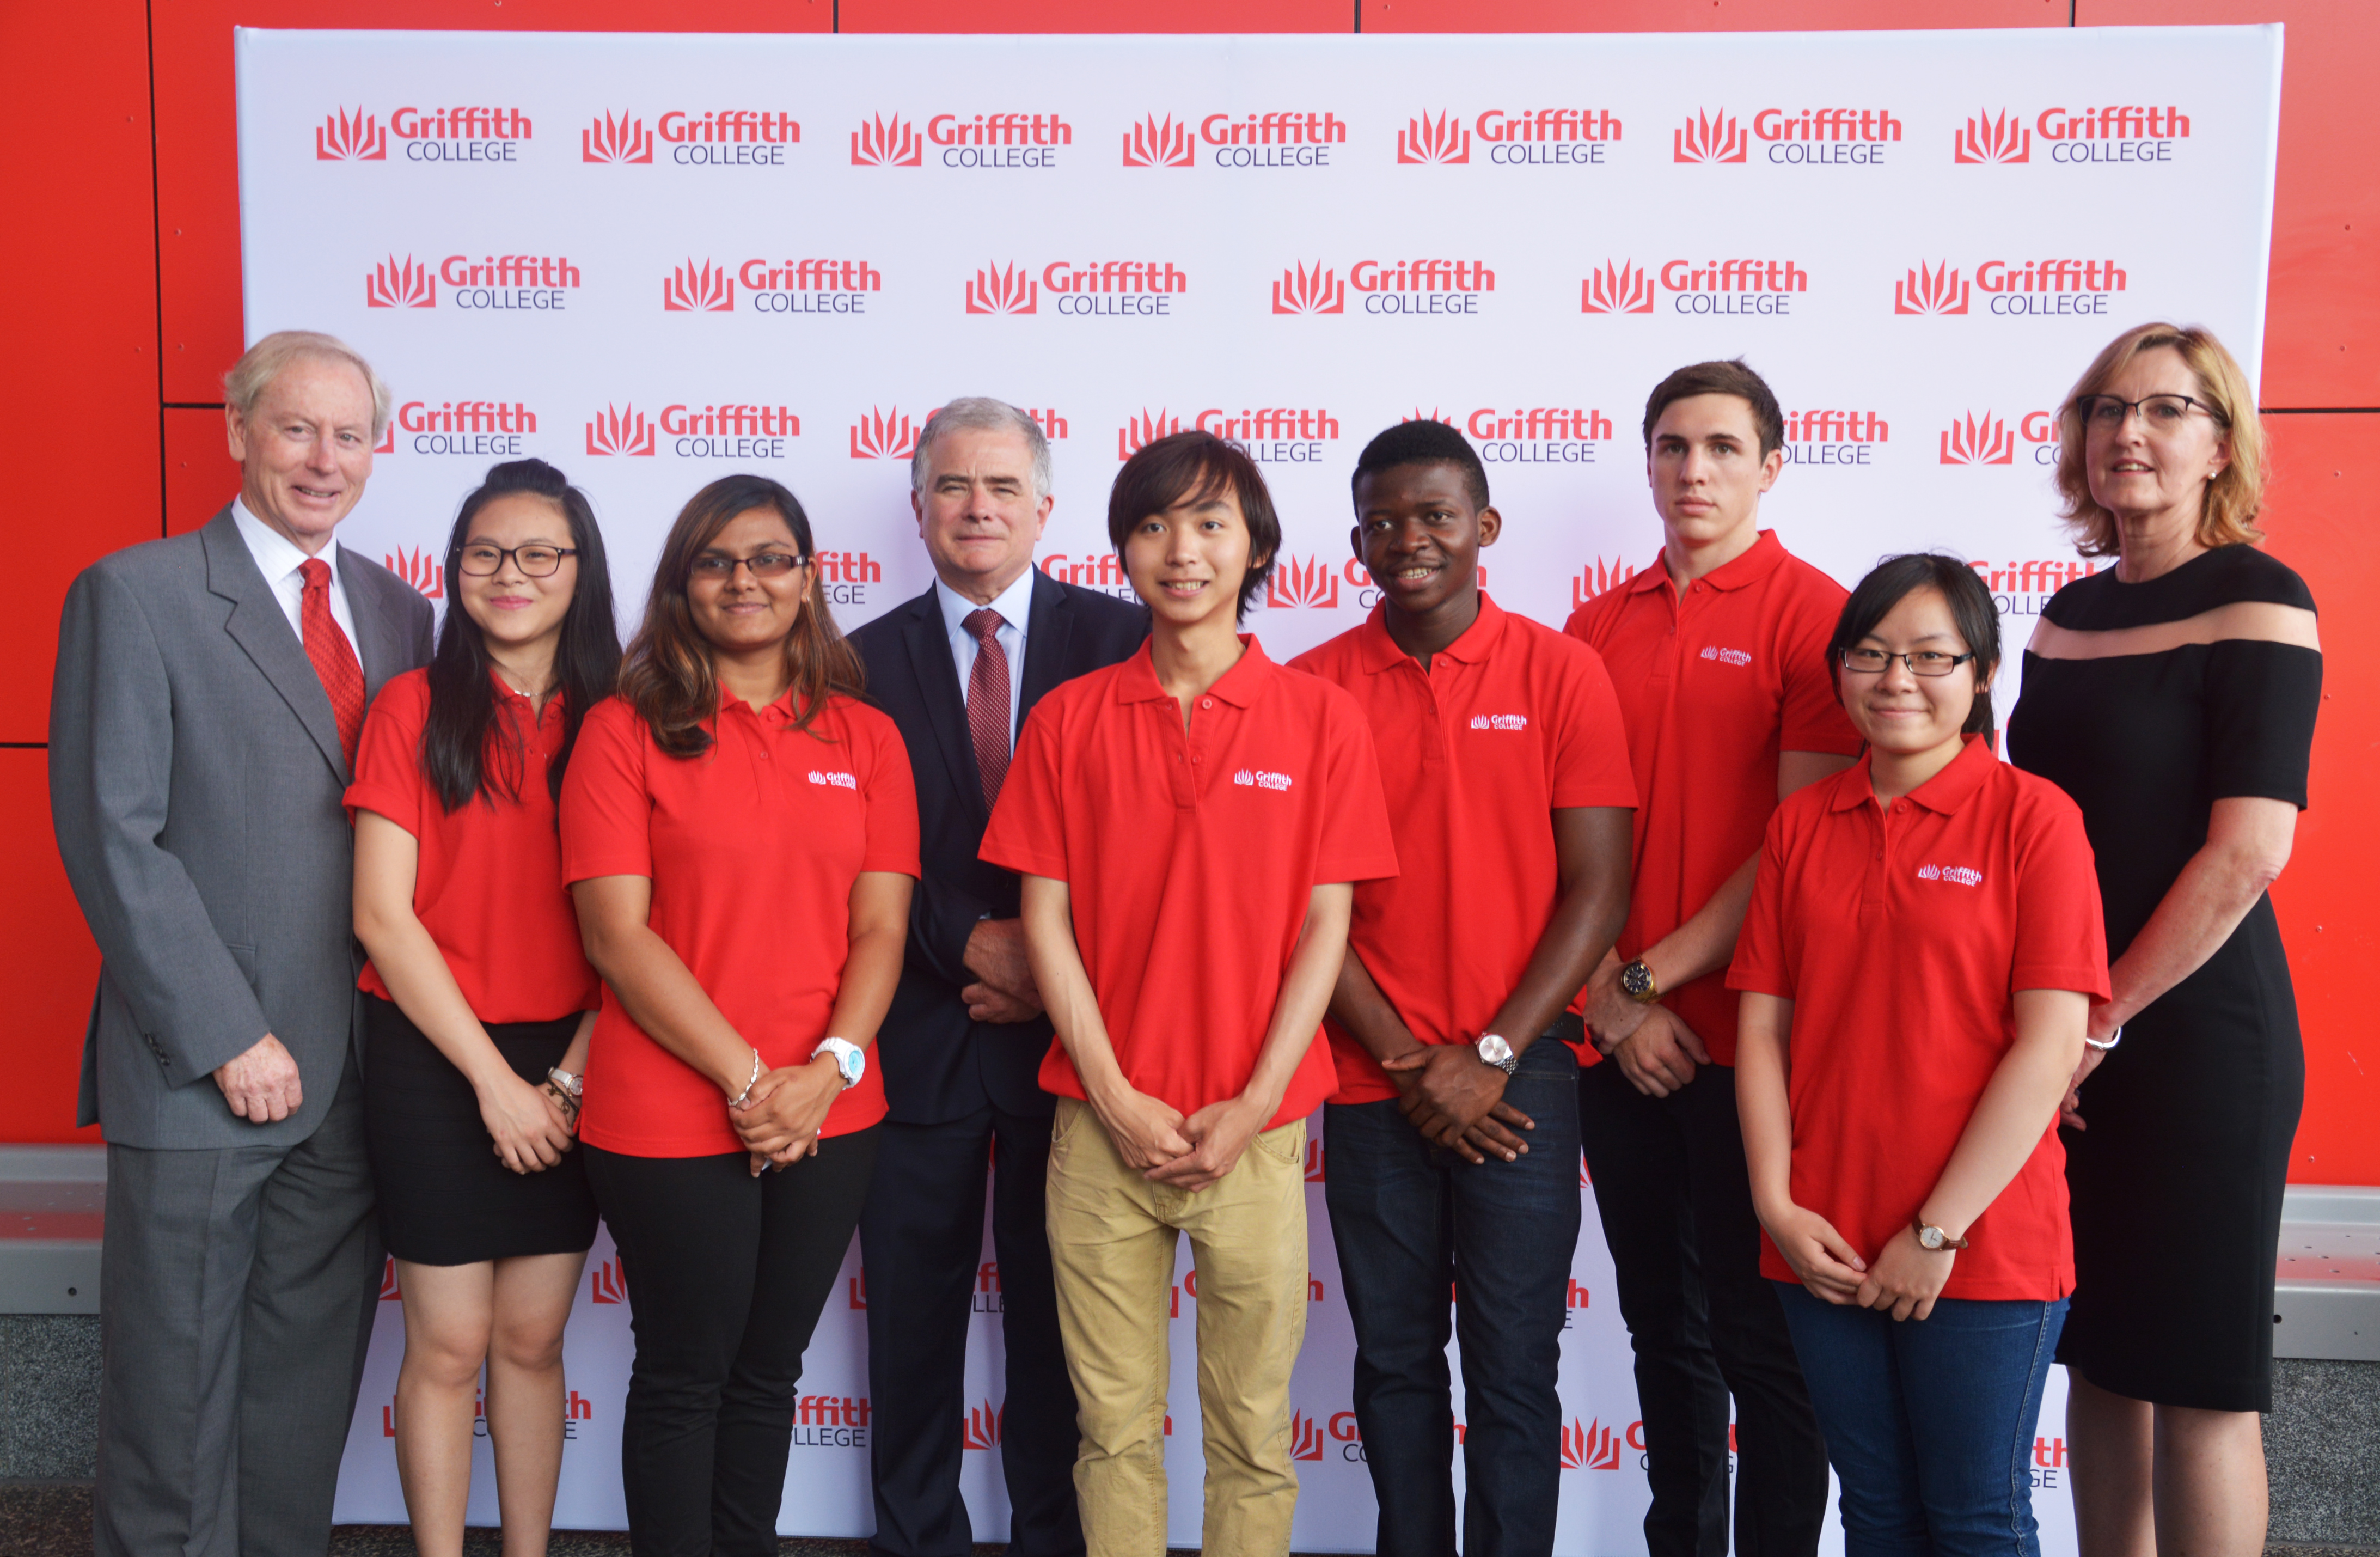 Navitas Group CEO University Programs Professor John Wood, Griffith University Vice Chancellor and President Professor Ian O'Connor and Griffith College Director and Principal Leigh Pointon with Griffith College student ambassadors at the Griffith College launch.